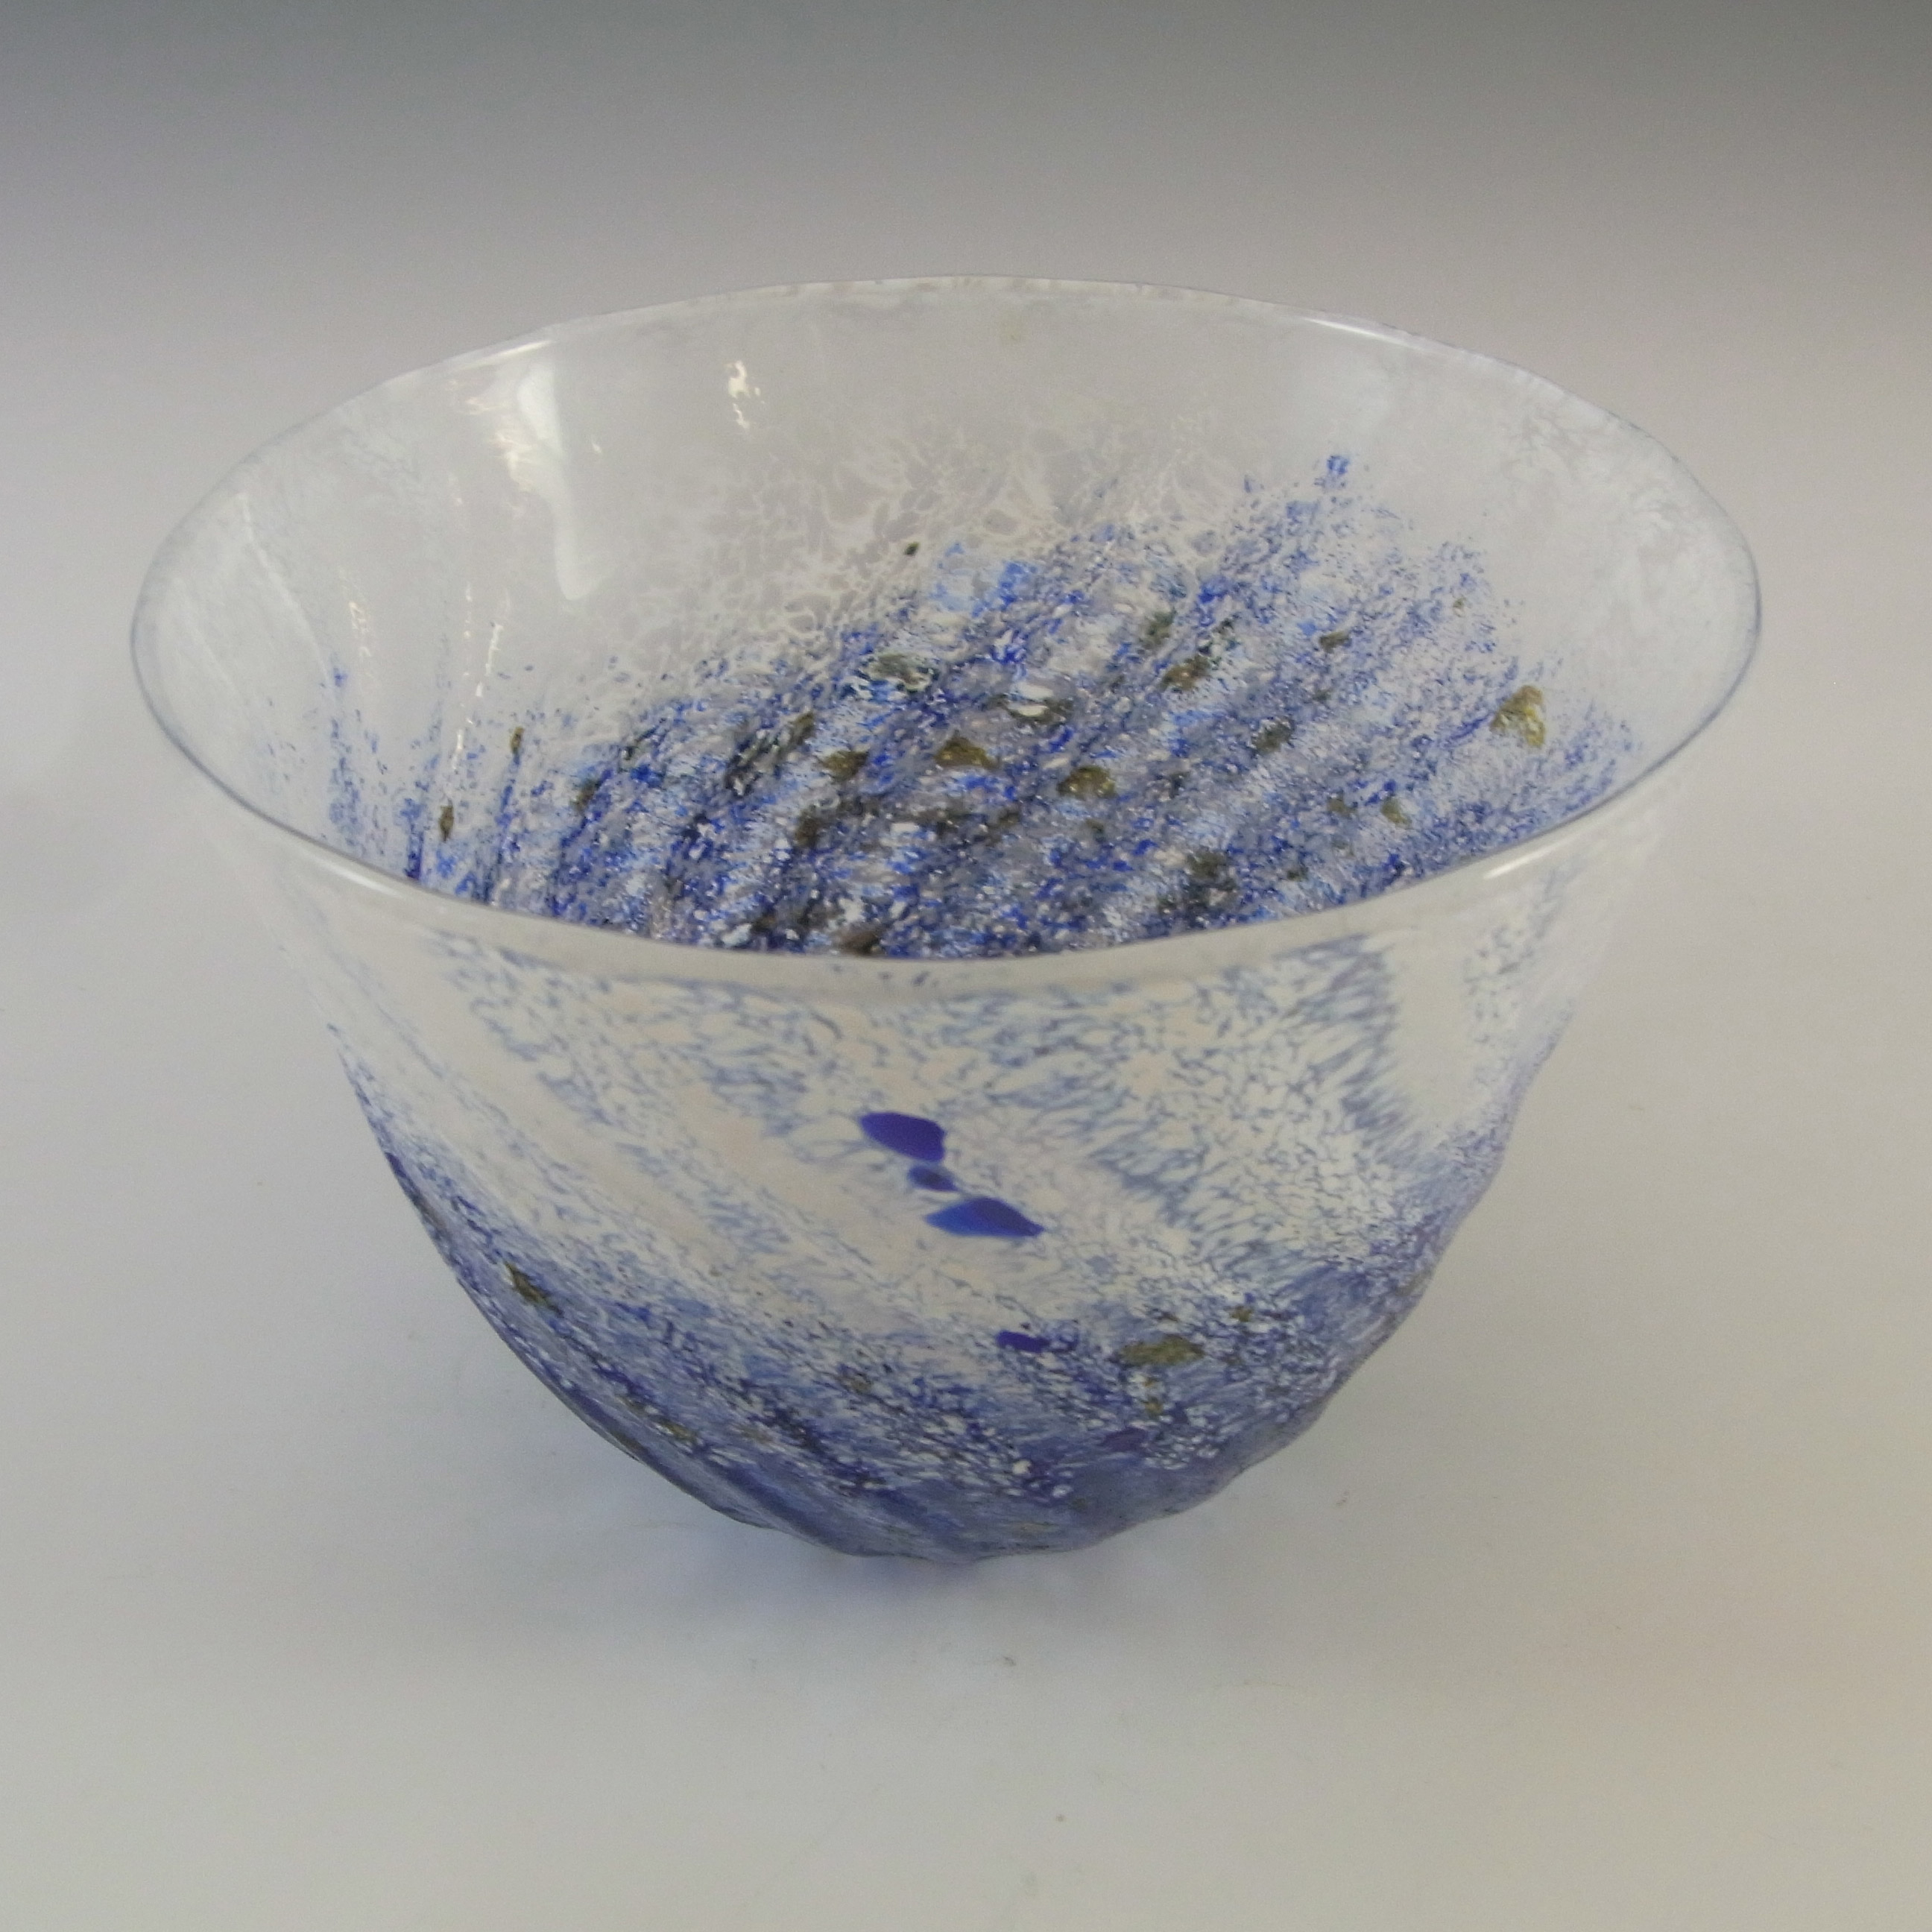 SIGNED Gusum Blue & White Swedish Glass Bowl by Milan Vobruba - Click Image to Close